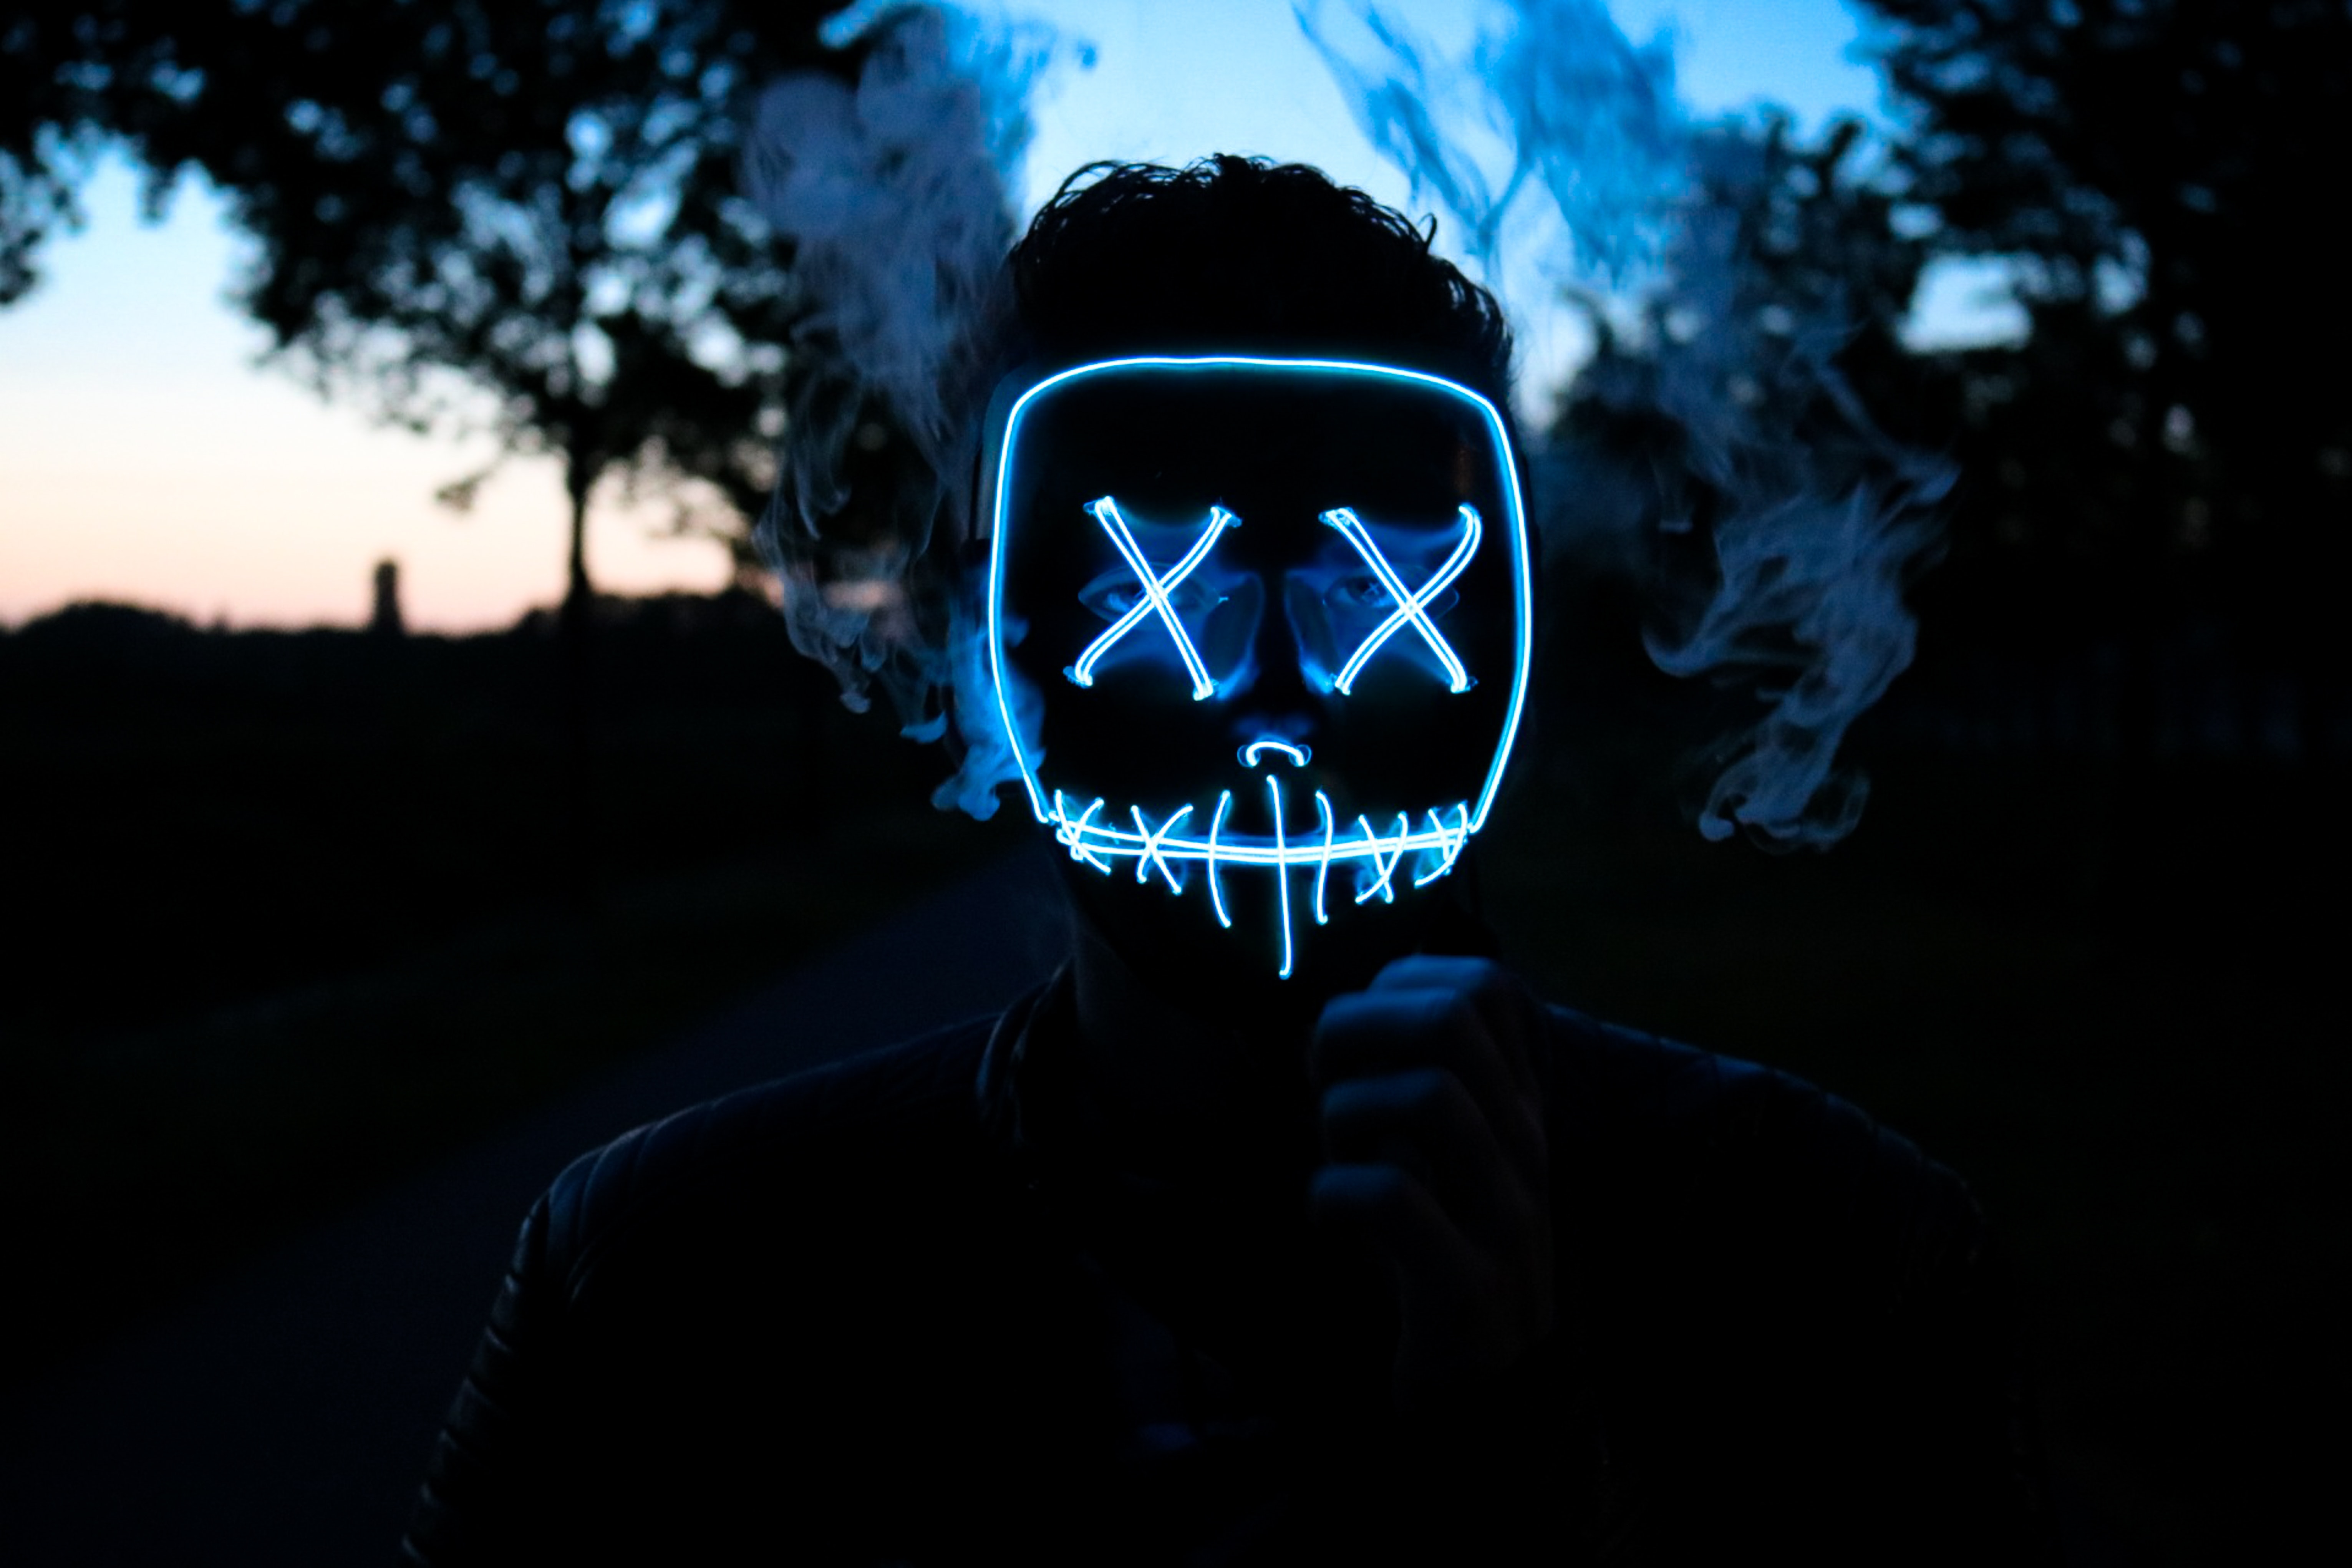 Purge mask led photos download the best free purge mask led stock photos hd images